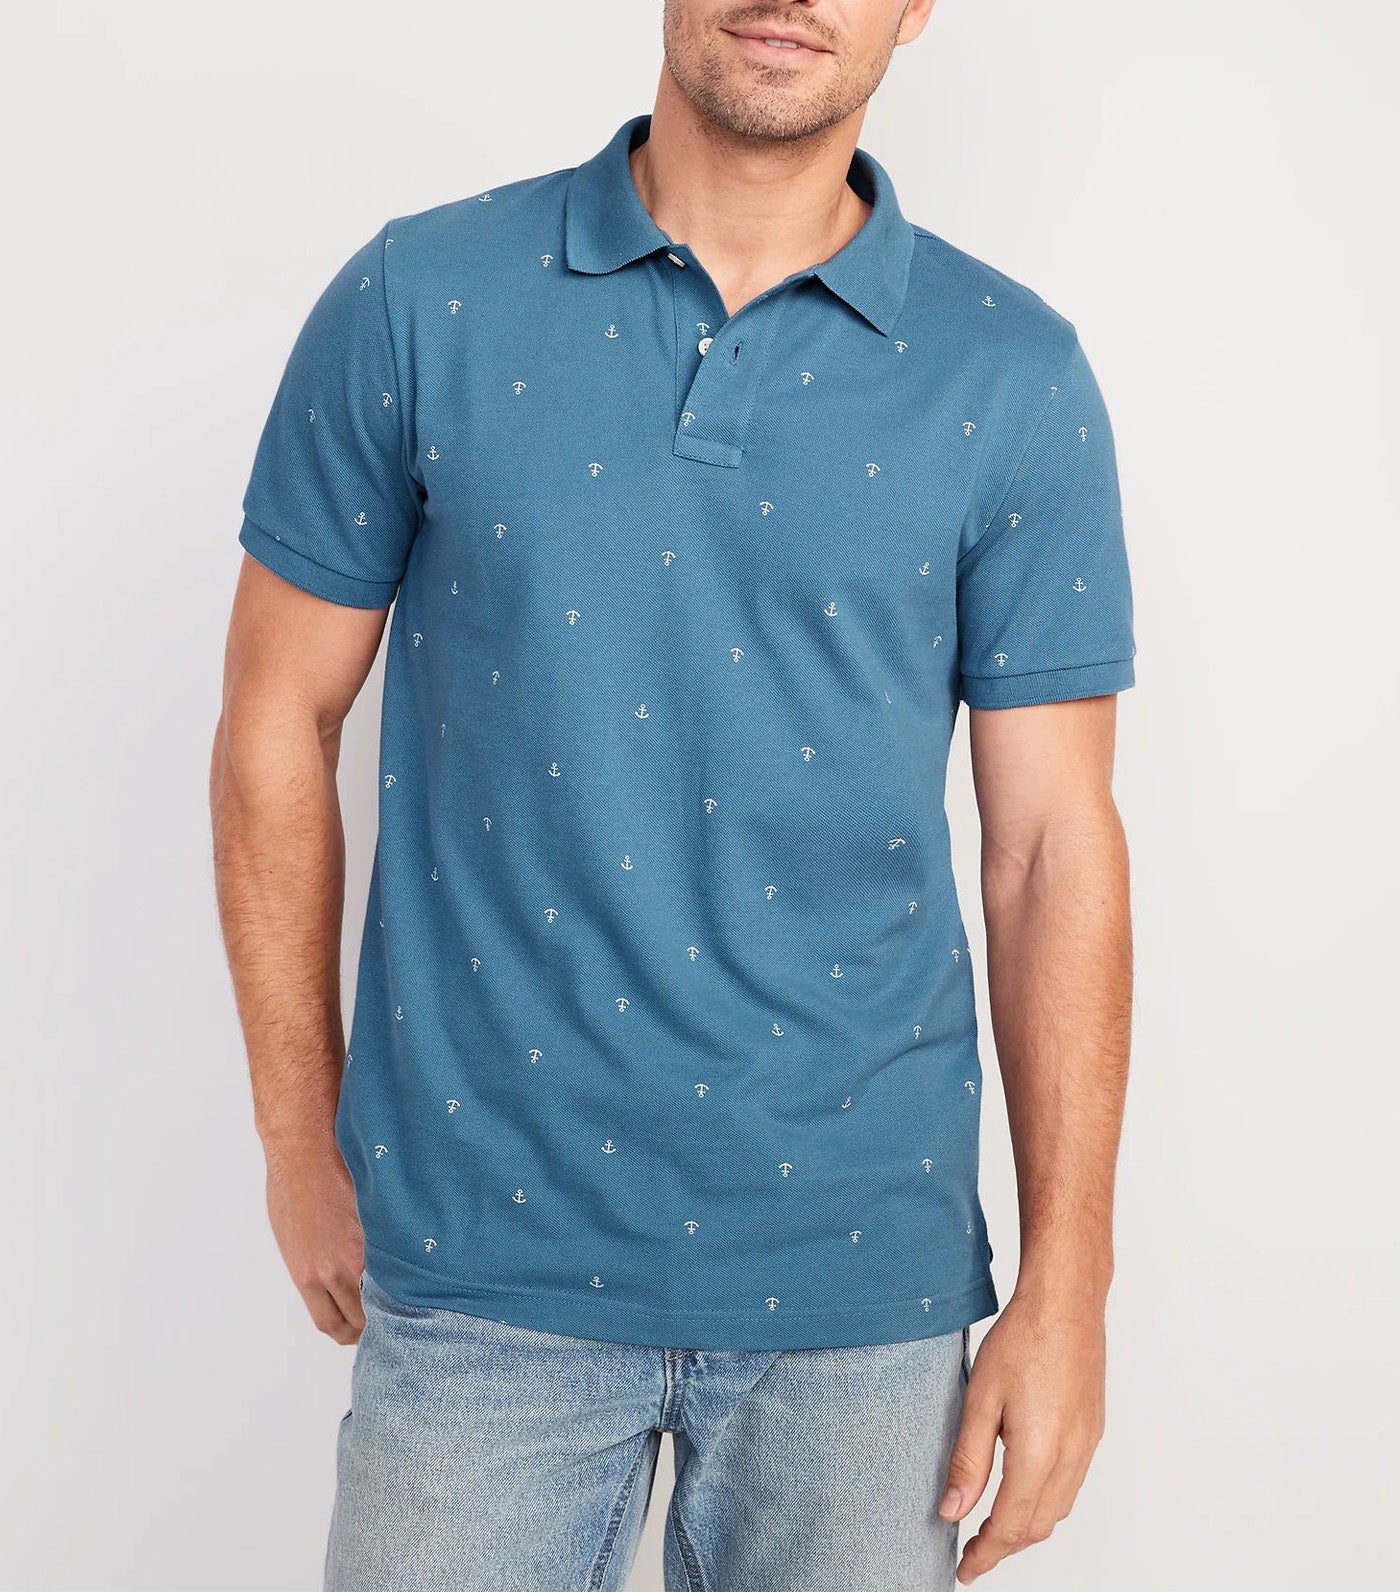 Printed Classic Fit Pique Polo for Men Anchor Blue